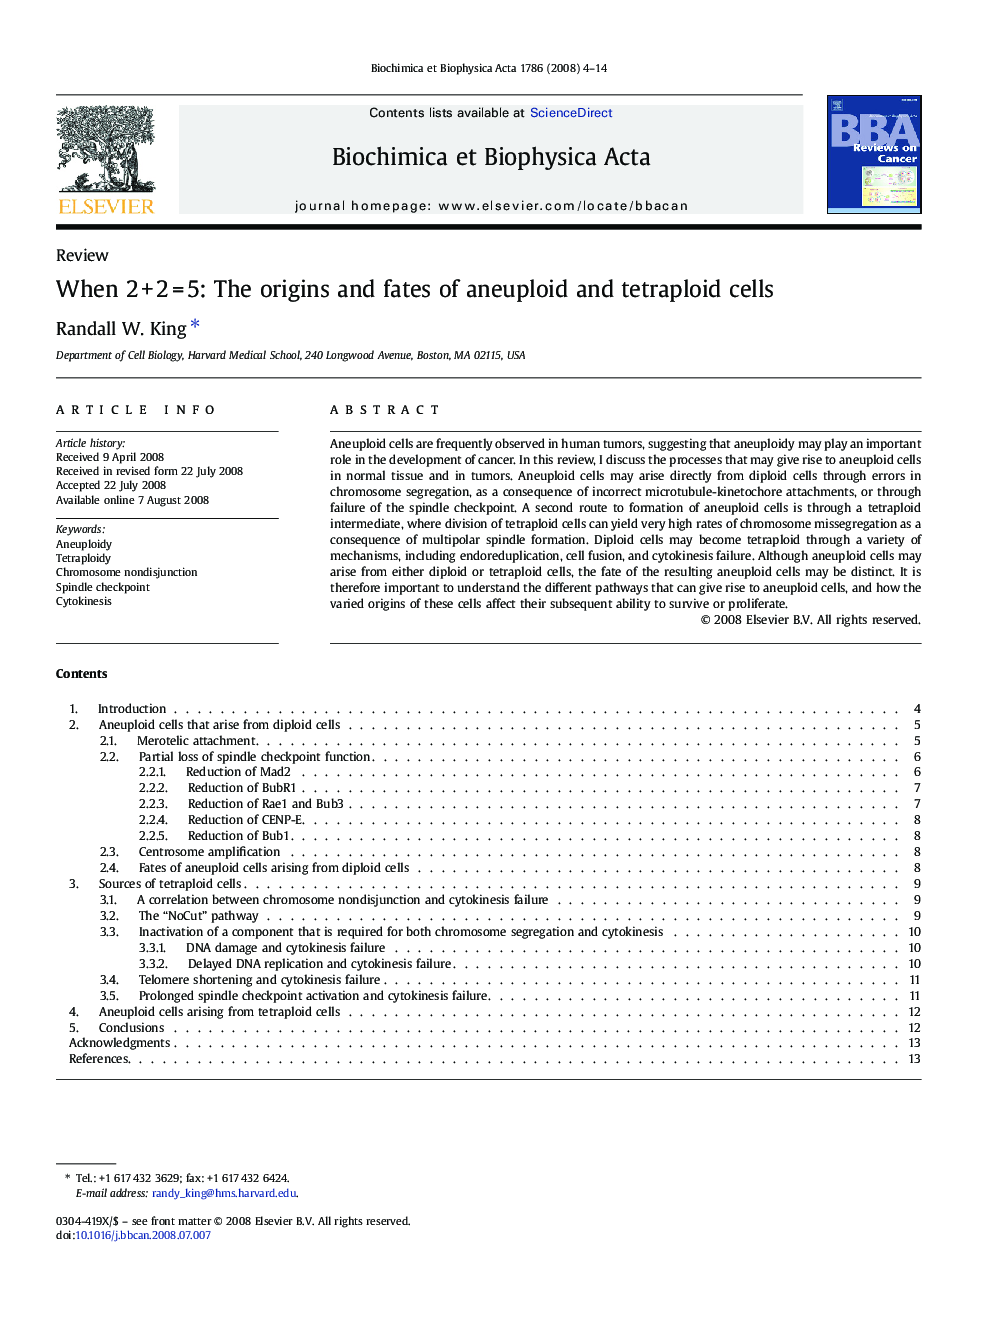 When 2 + 2 = 5: The origins and fates of aneuploid and tetraploid cells